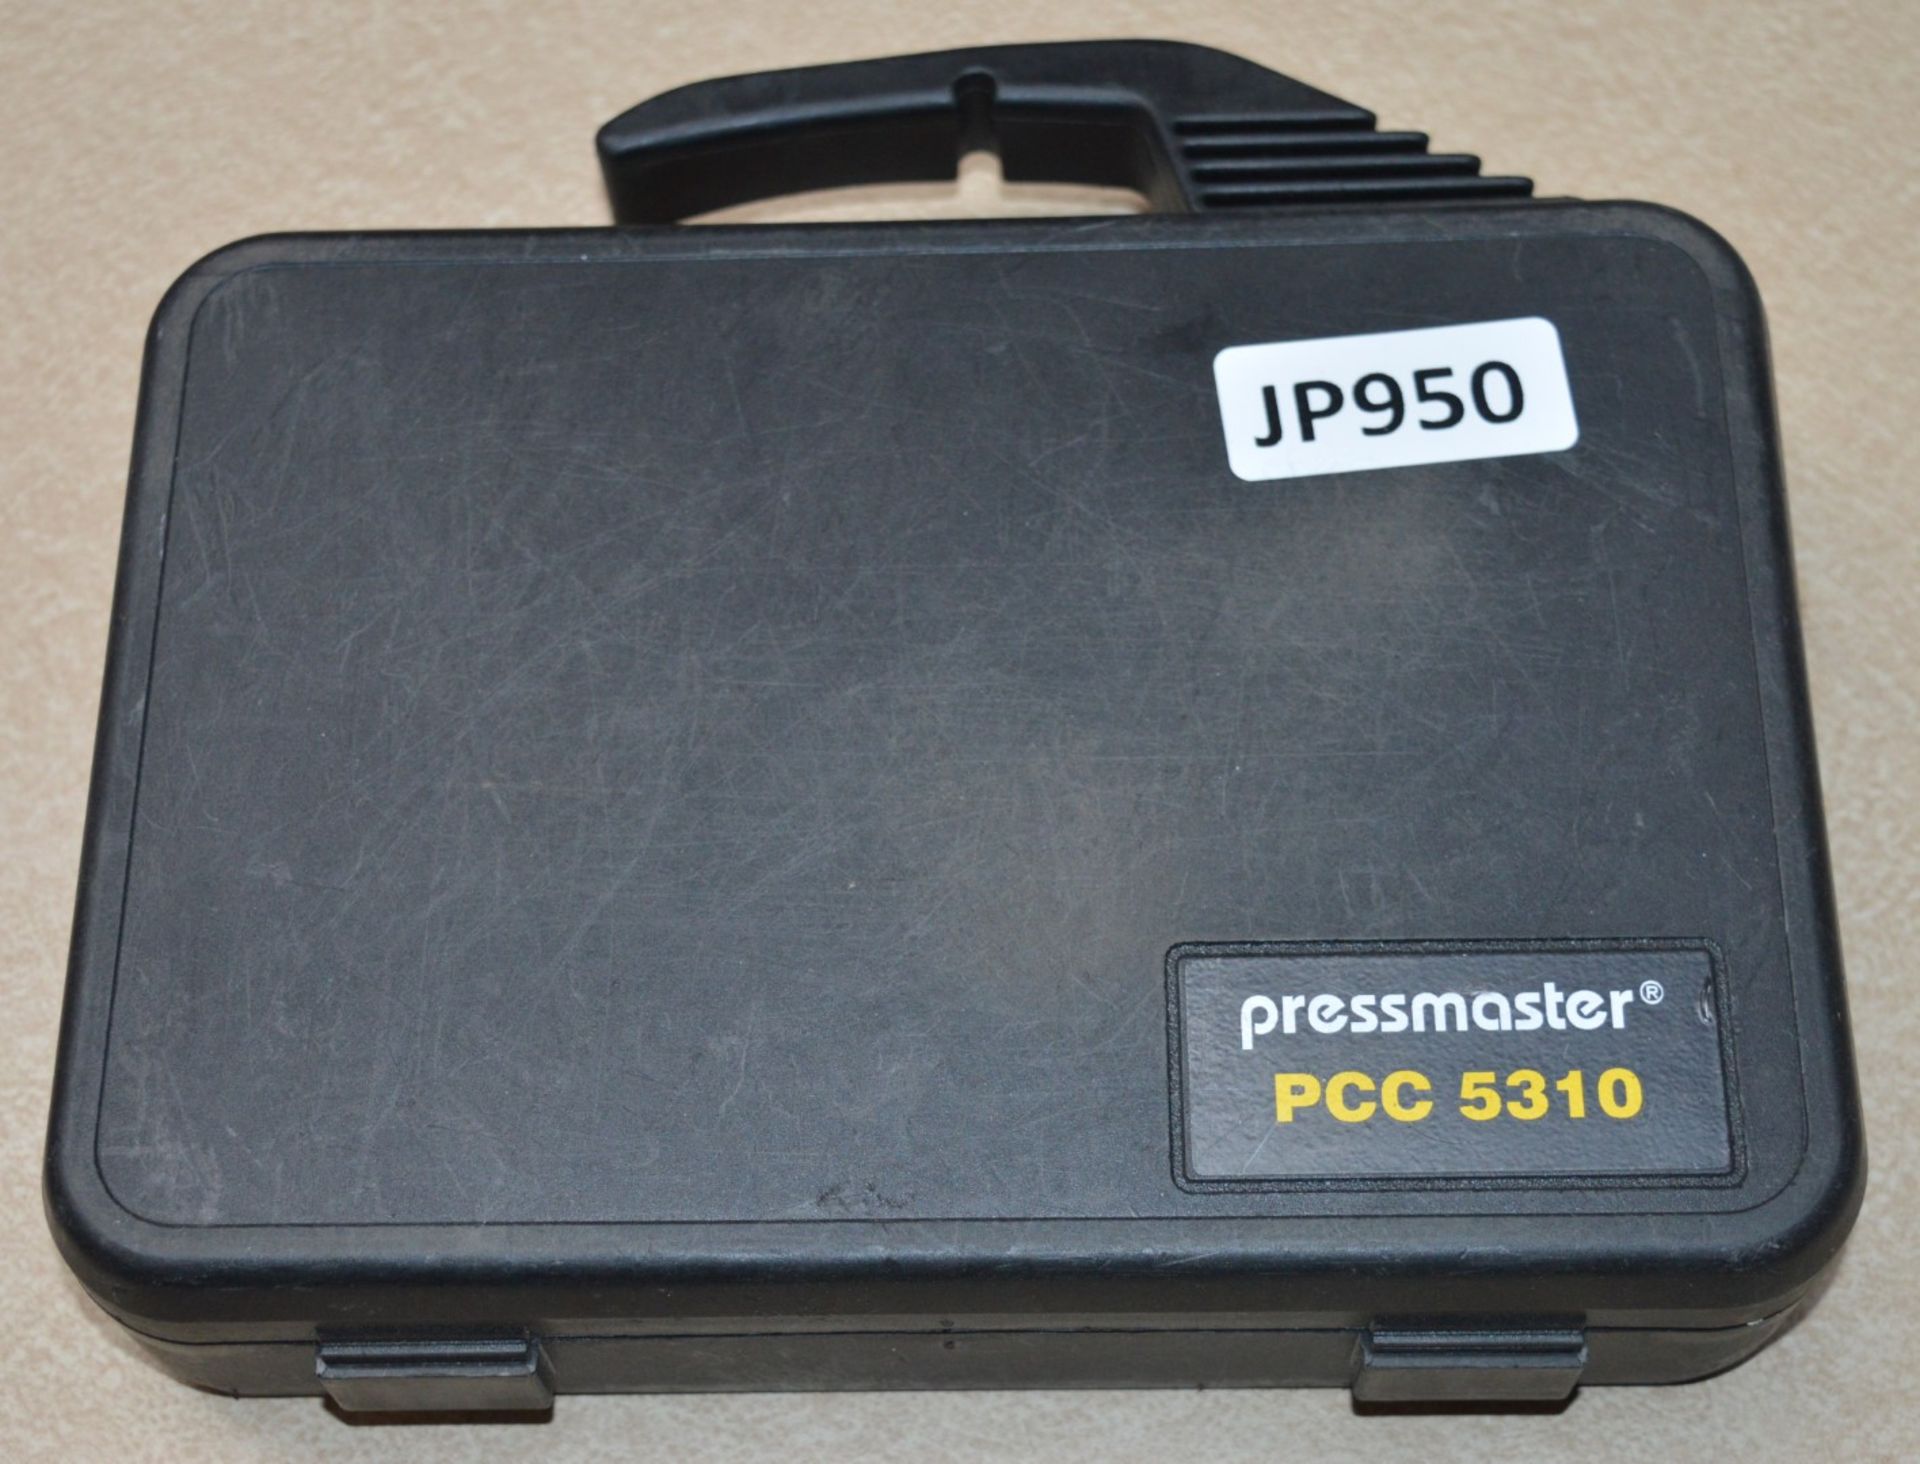 1 x Pressmaster PCC 5310 Coax Crimping Tool With Dies - Telecoms Tooling - Comes With Protective - Image 2 of 2